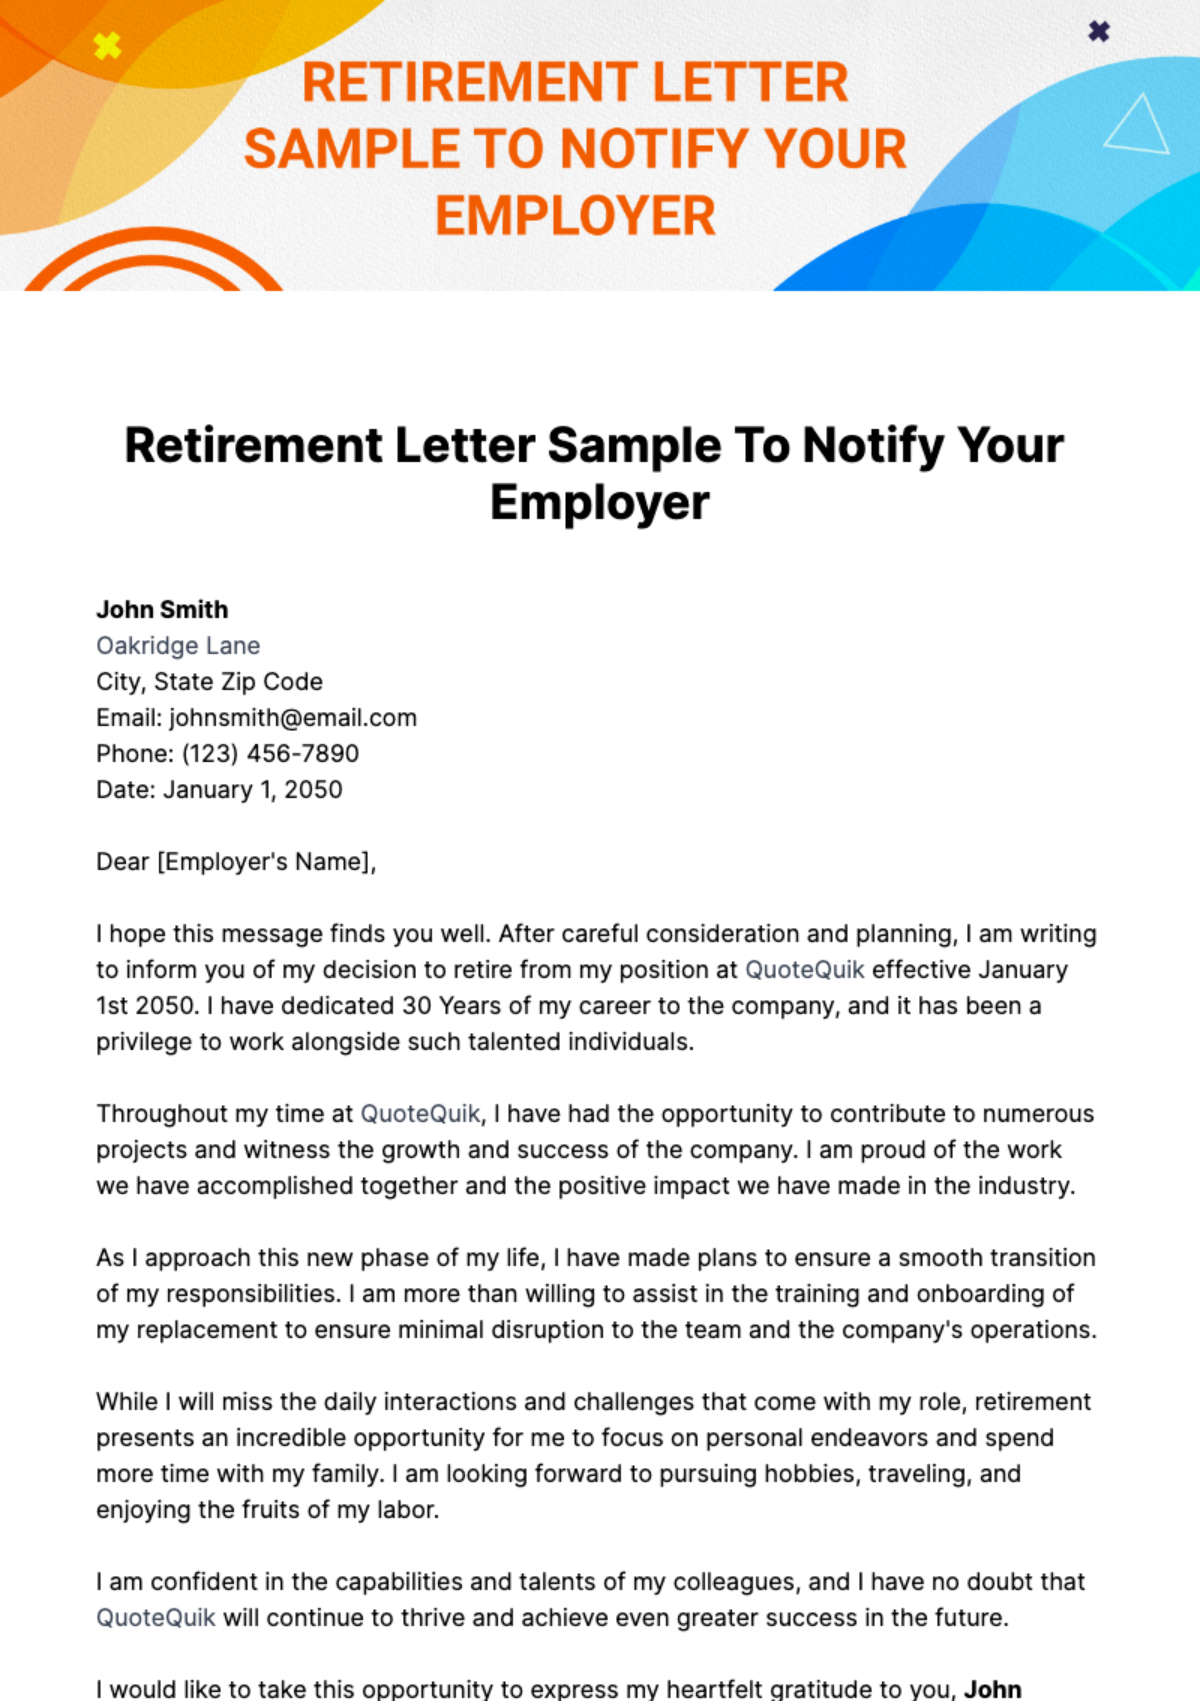 Free Retirement Letter Sample To Notify Your Employer Template